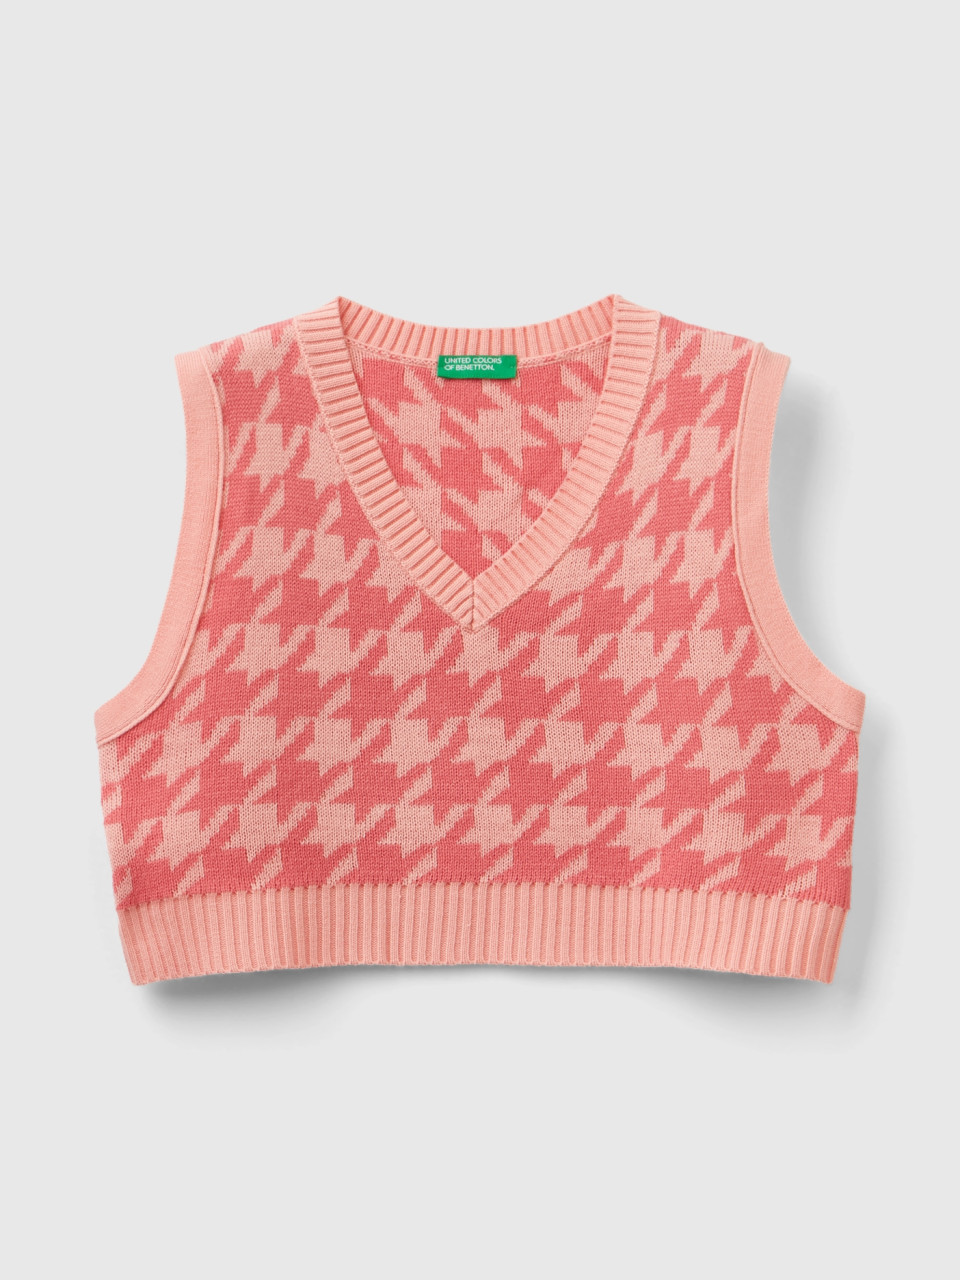 Benetton, Cropped-weste Im Hahnentrittmuster, Pink, female